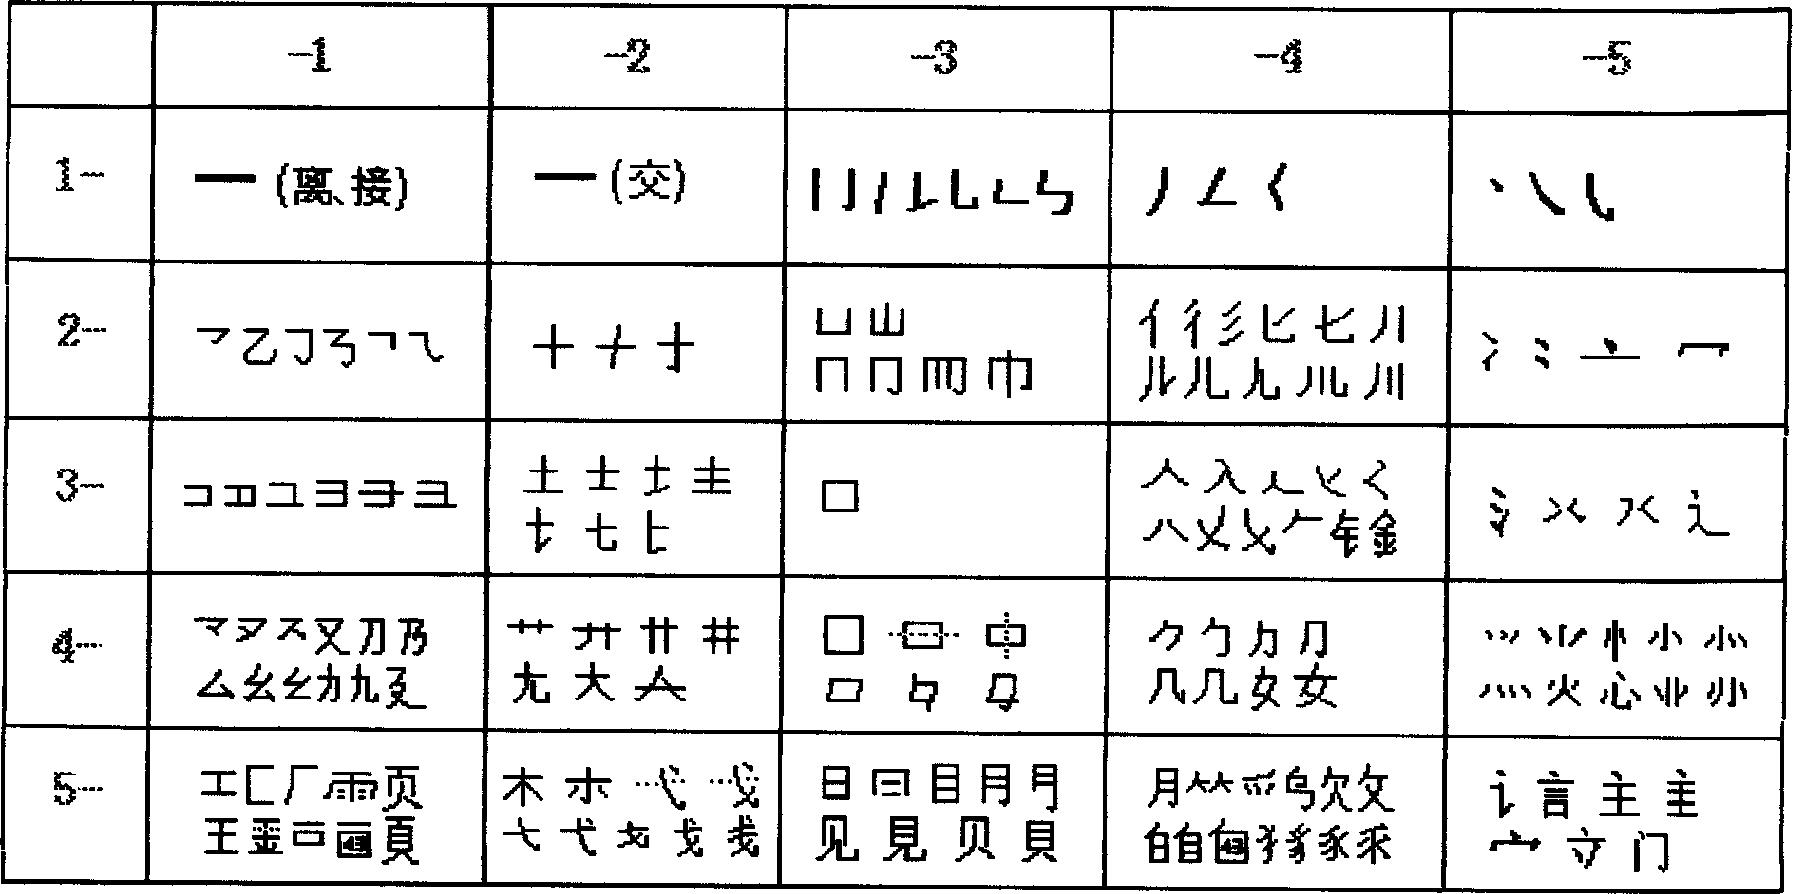 Third kind coding method of combined code chinese character and numerical input method